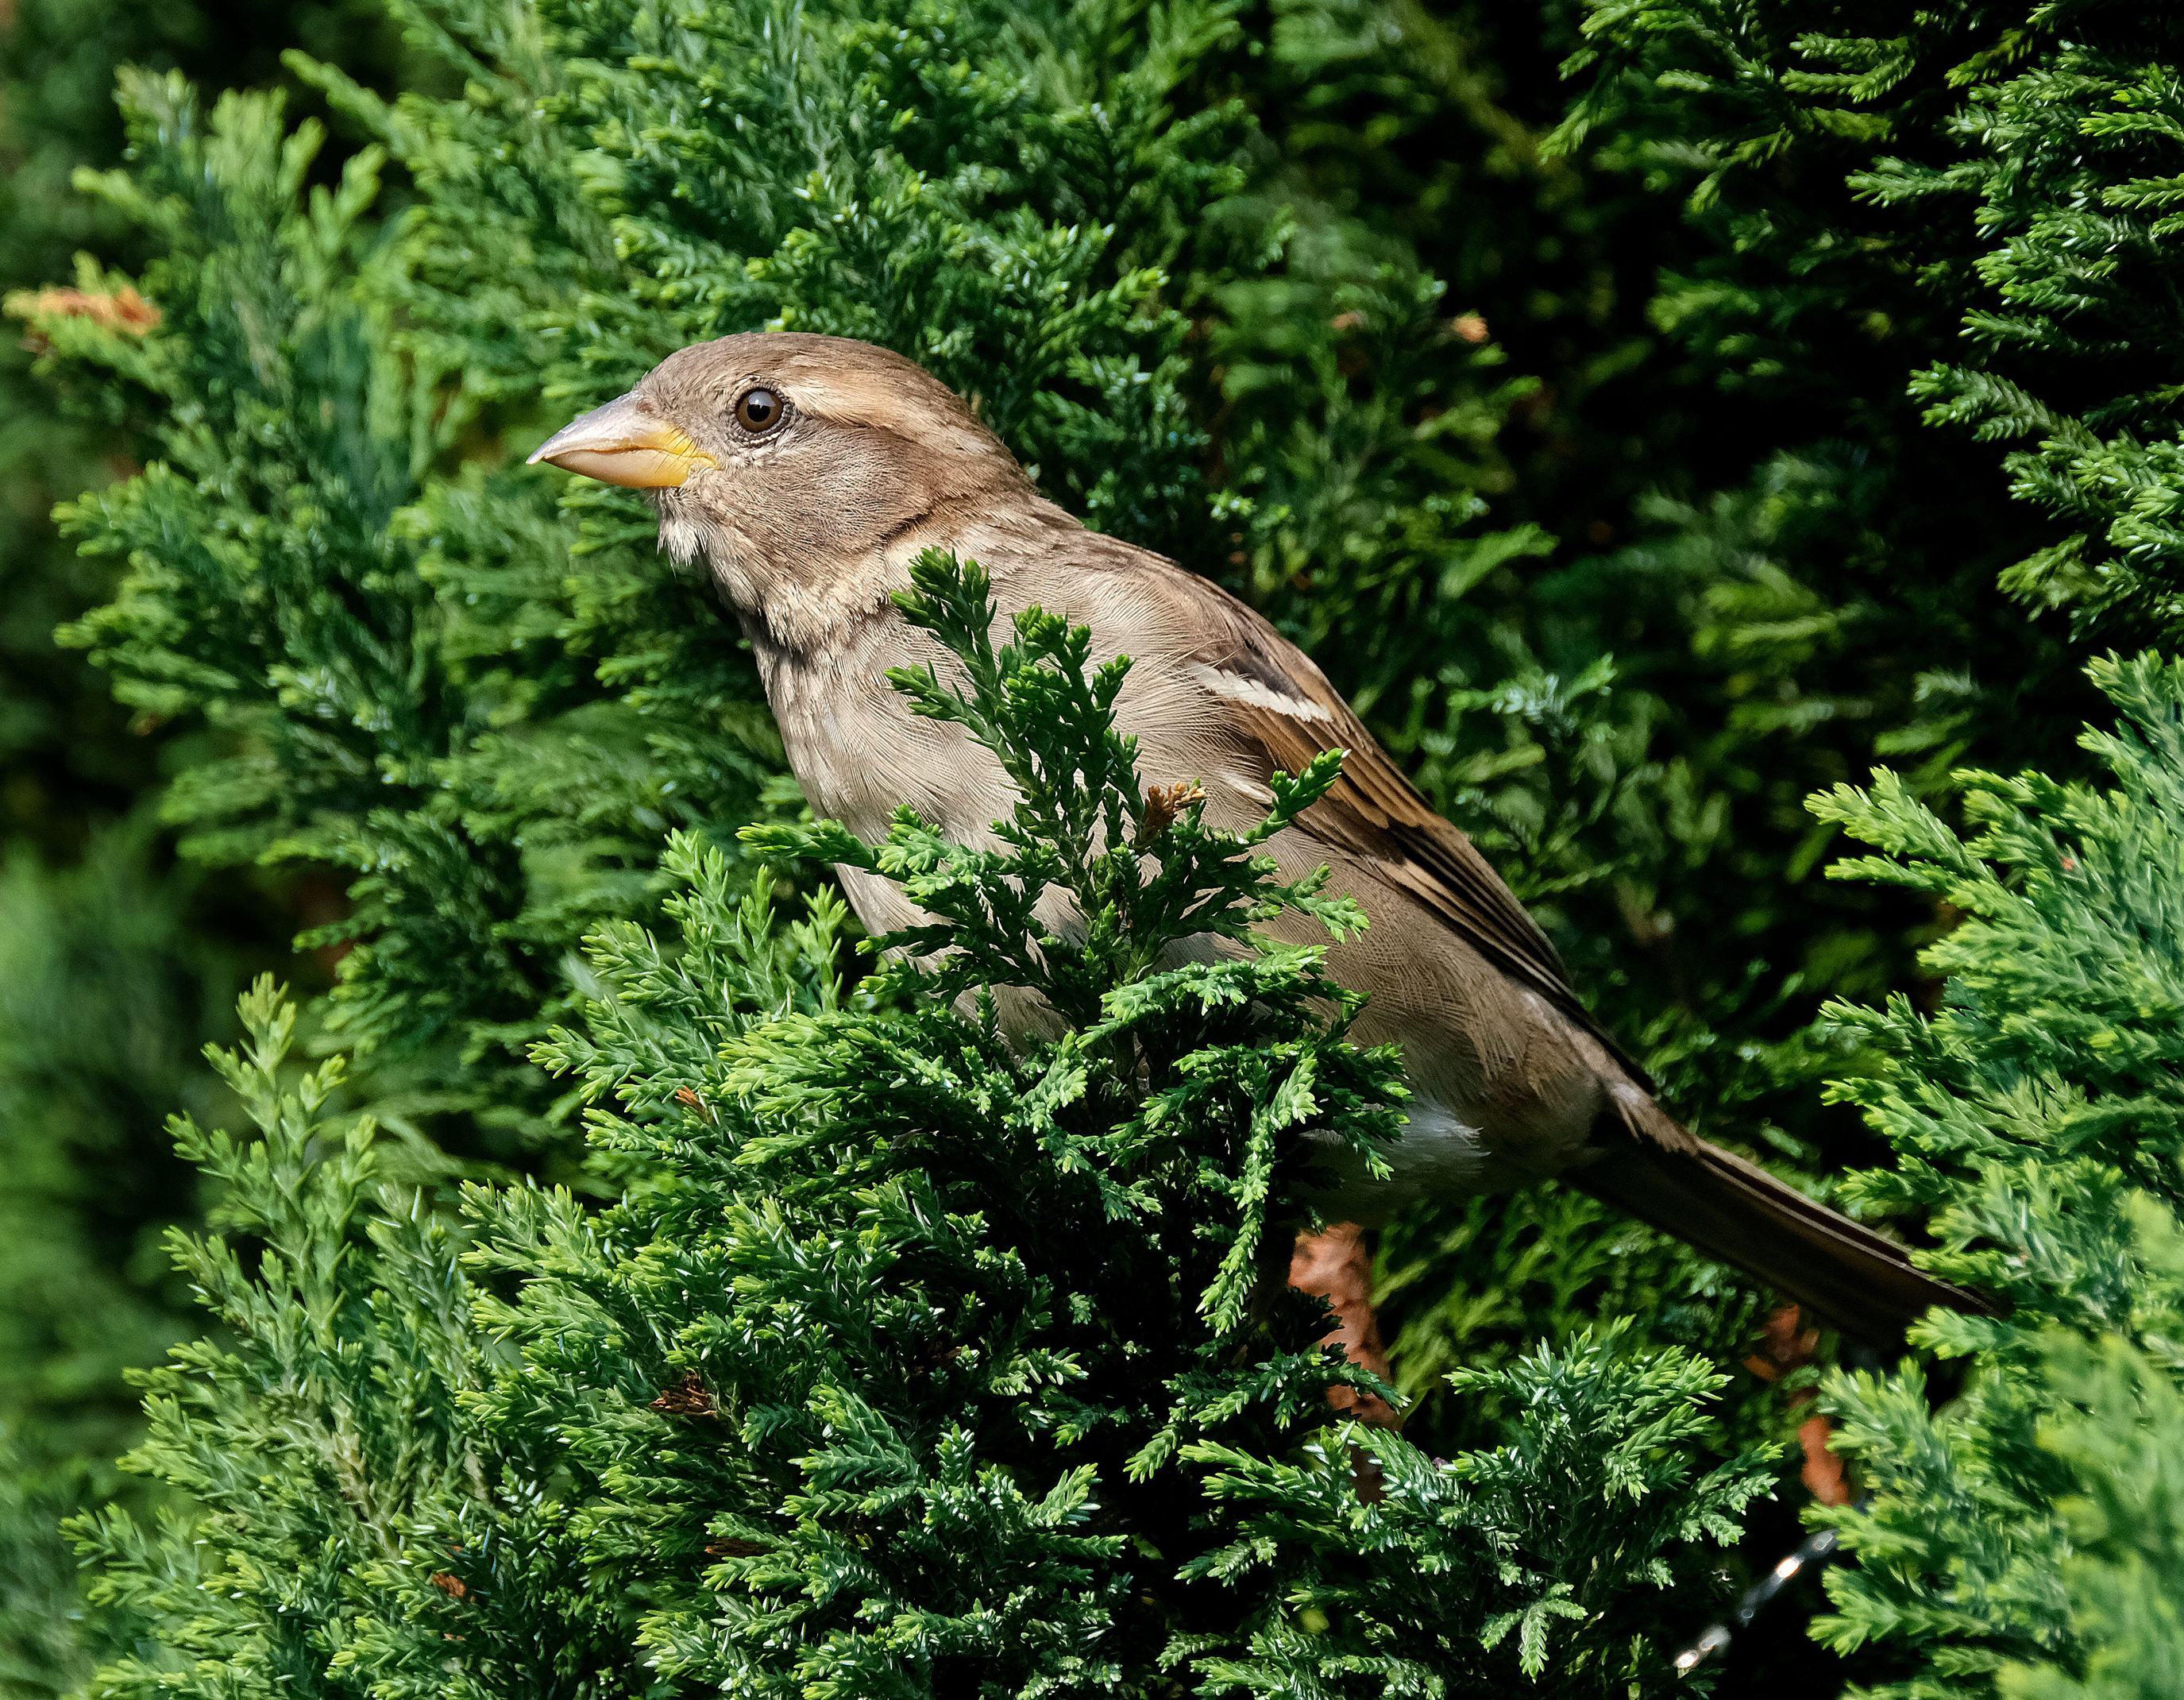 House sparrow in an urban hedge (Alamy/PA)